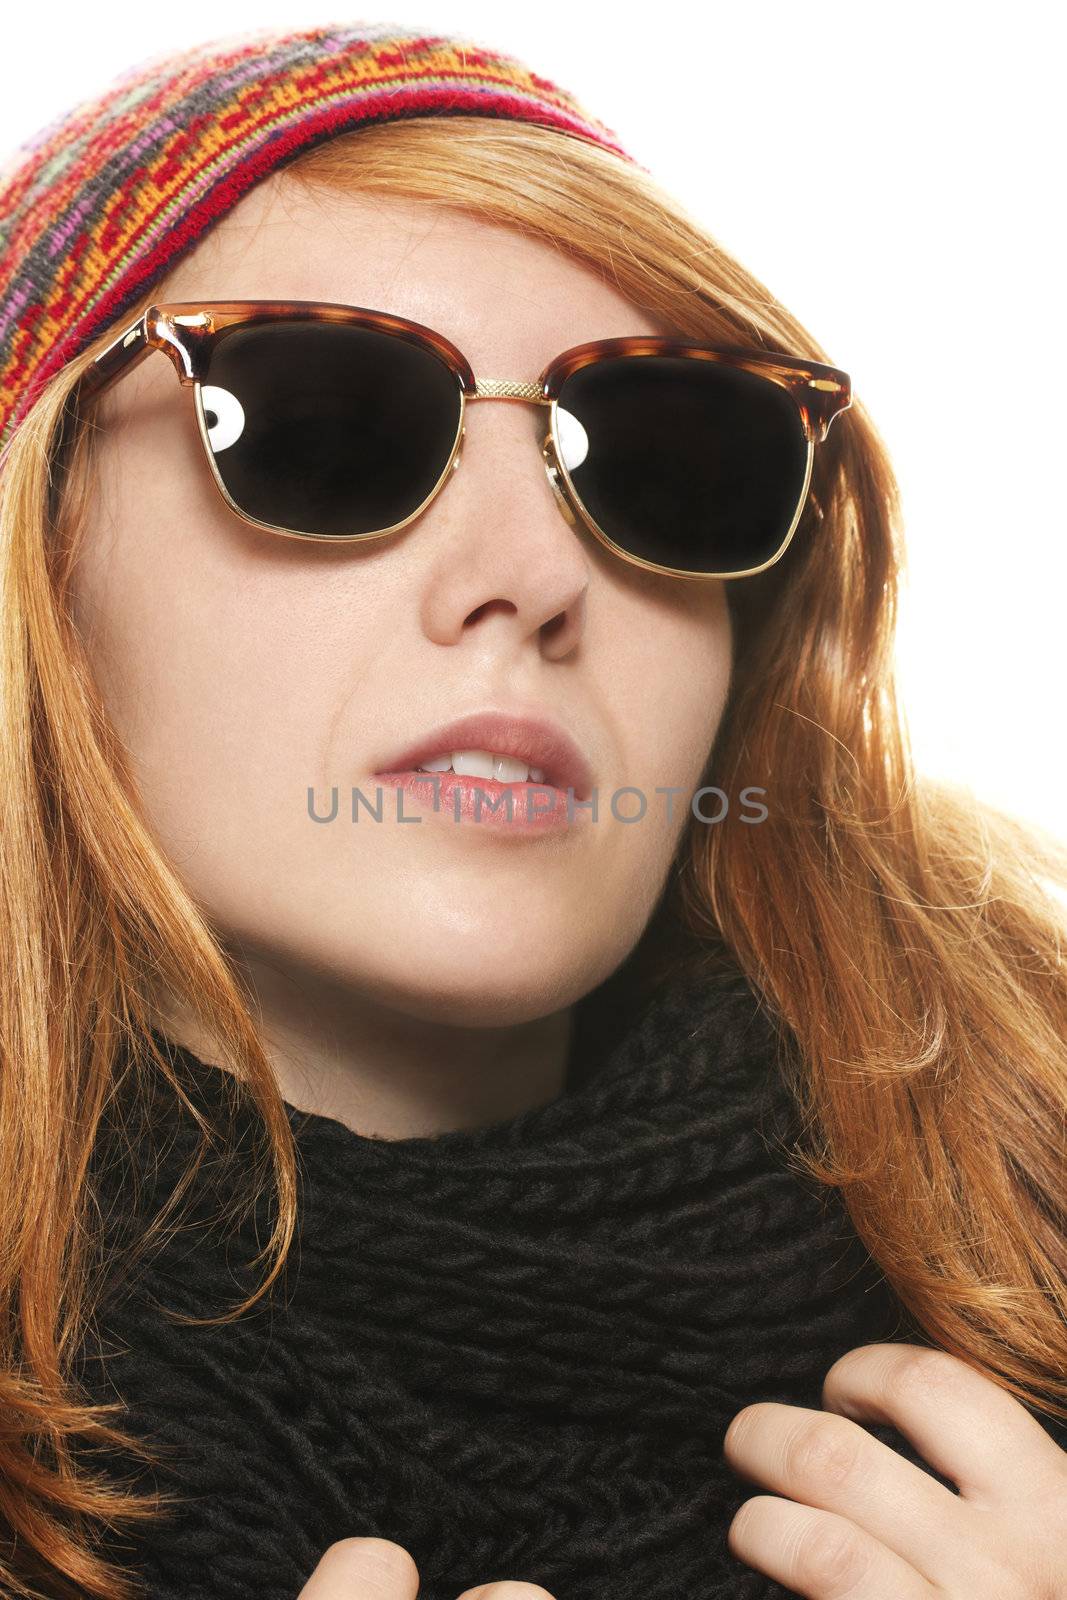 cool redhead woman wearing sunglasses in winter dress on white background